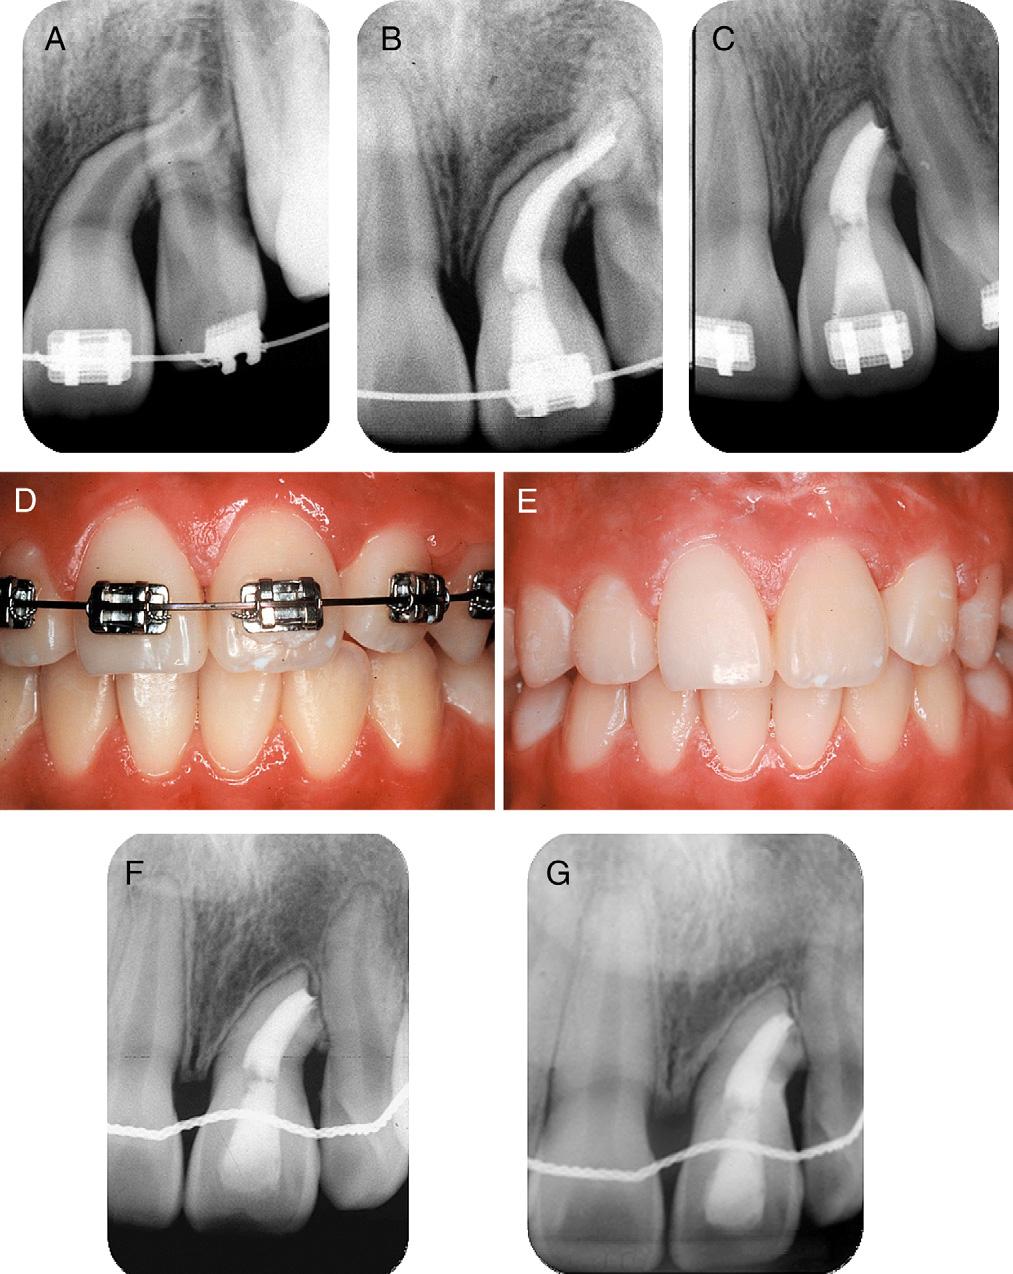 Figure 2. (A) Periapical radiograph of the root dilaceration; (B) after root canal filling; (C) and after apicoectomy.